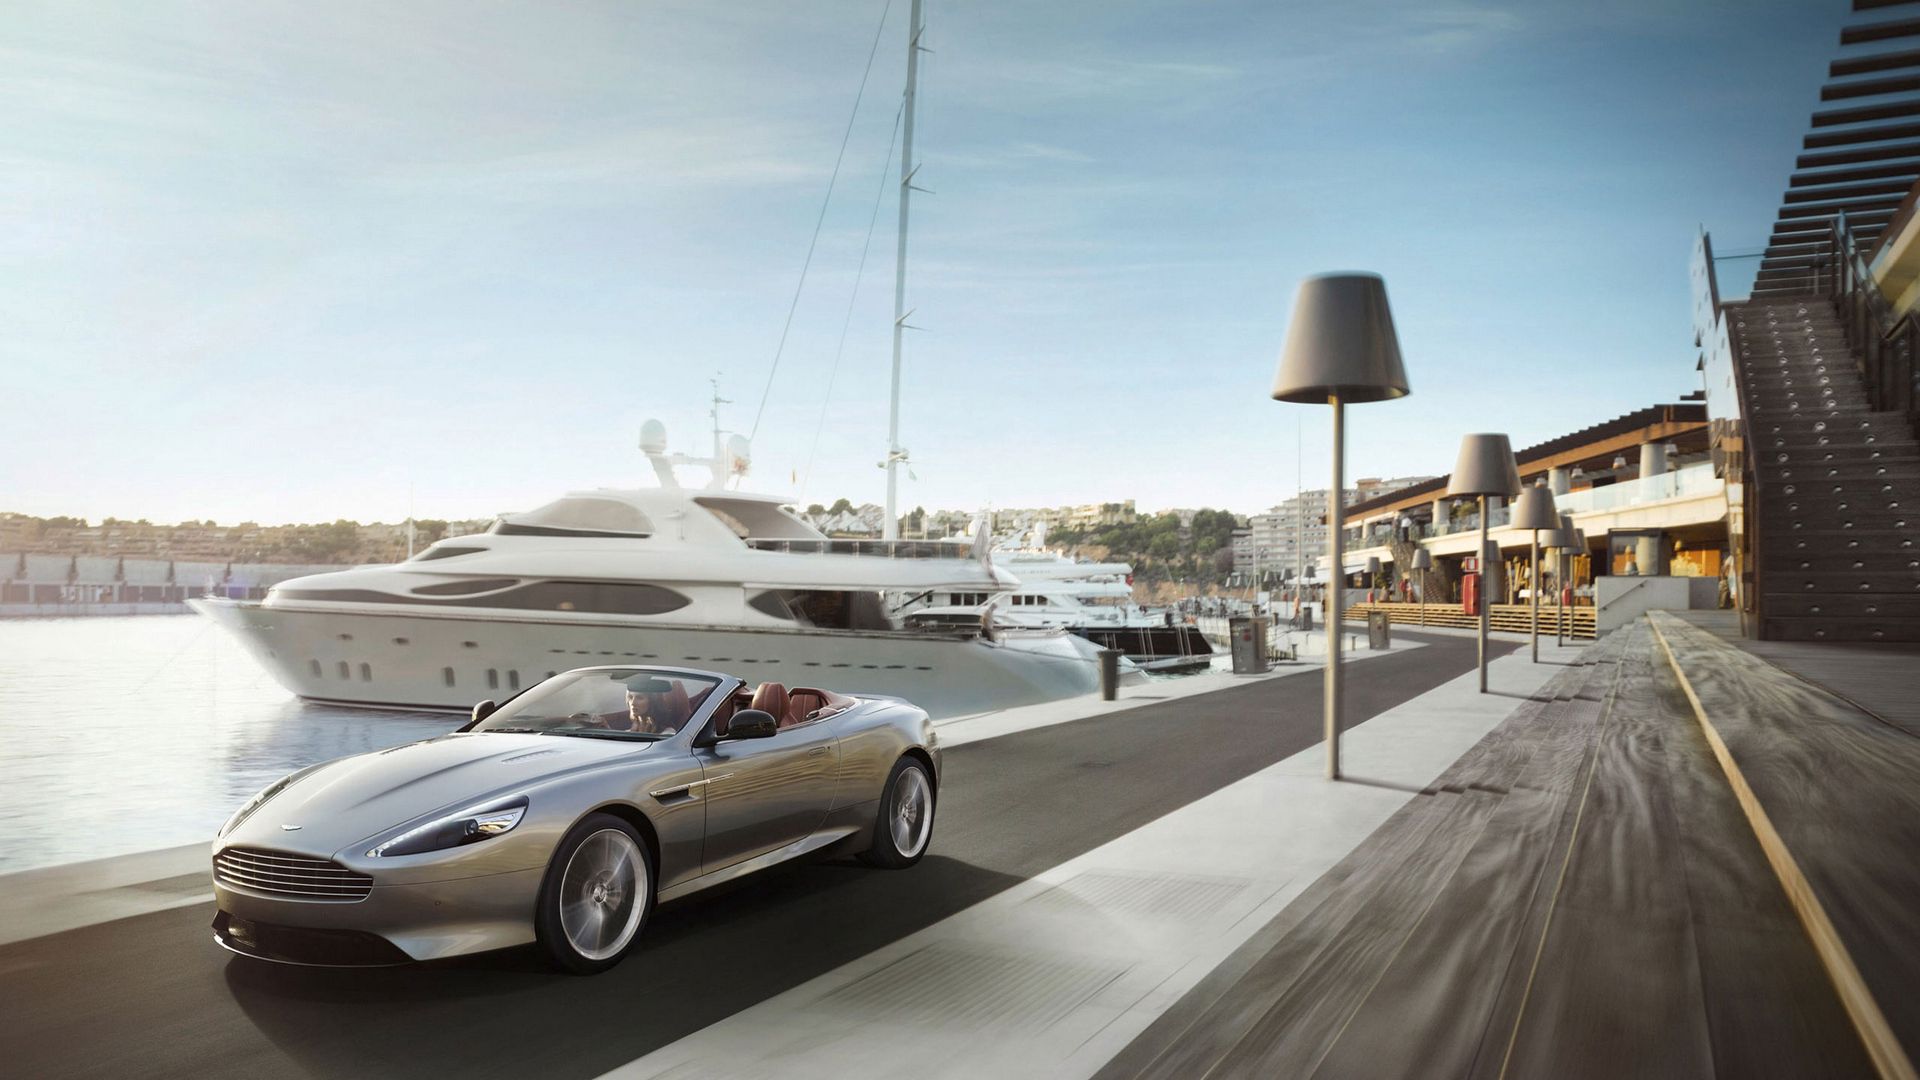 86100 download wallpaper yachts, aston martin, cars, traffic, movement, cabriolet, wharf, berth screensavers and pictures for free